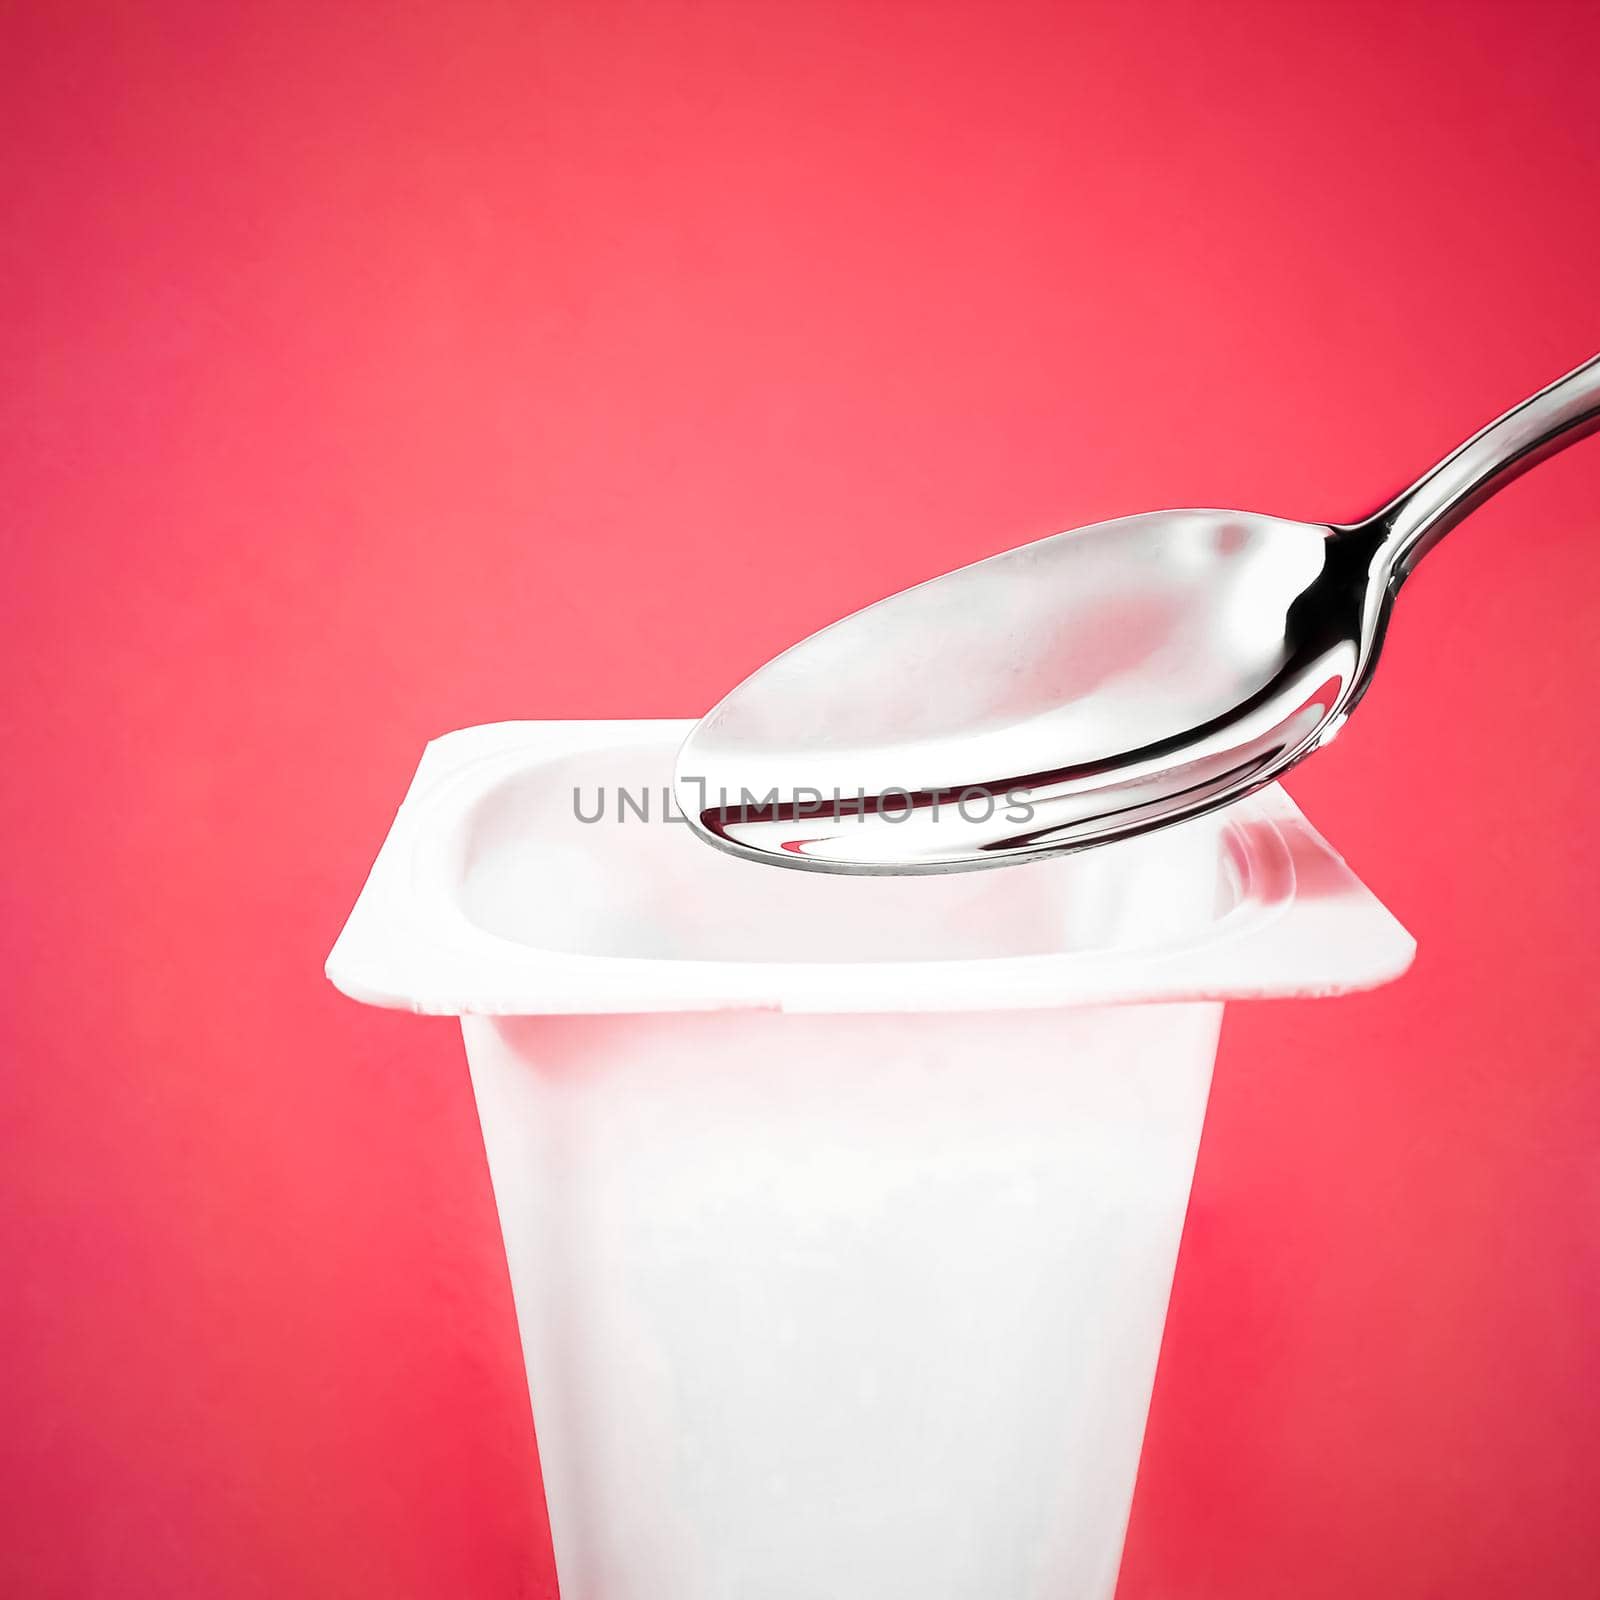 Yogurt cup and silver spoon on red background, white plastic container with yoghurt cream, fresh dairy product for healthy diet and nutrition balance by Anneleven